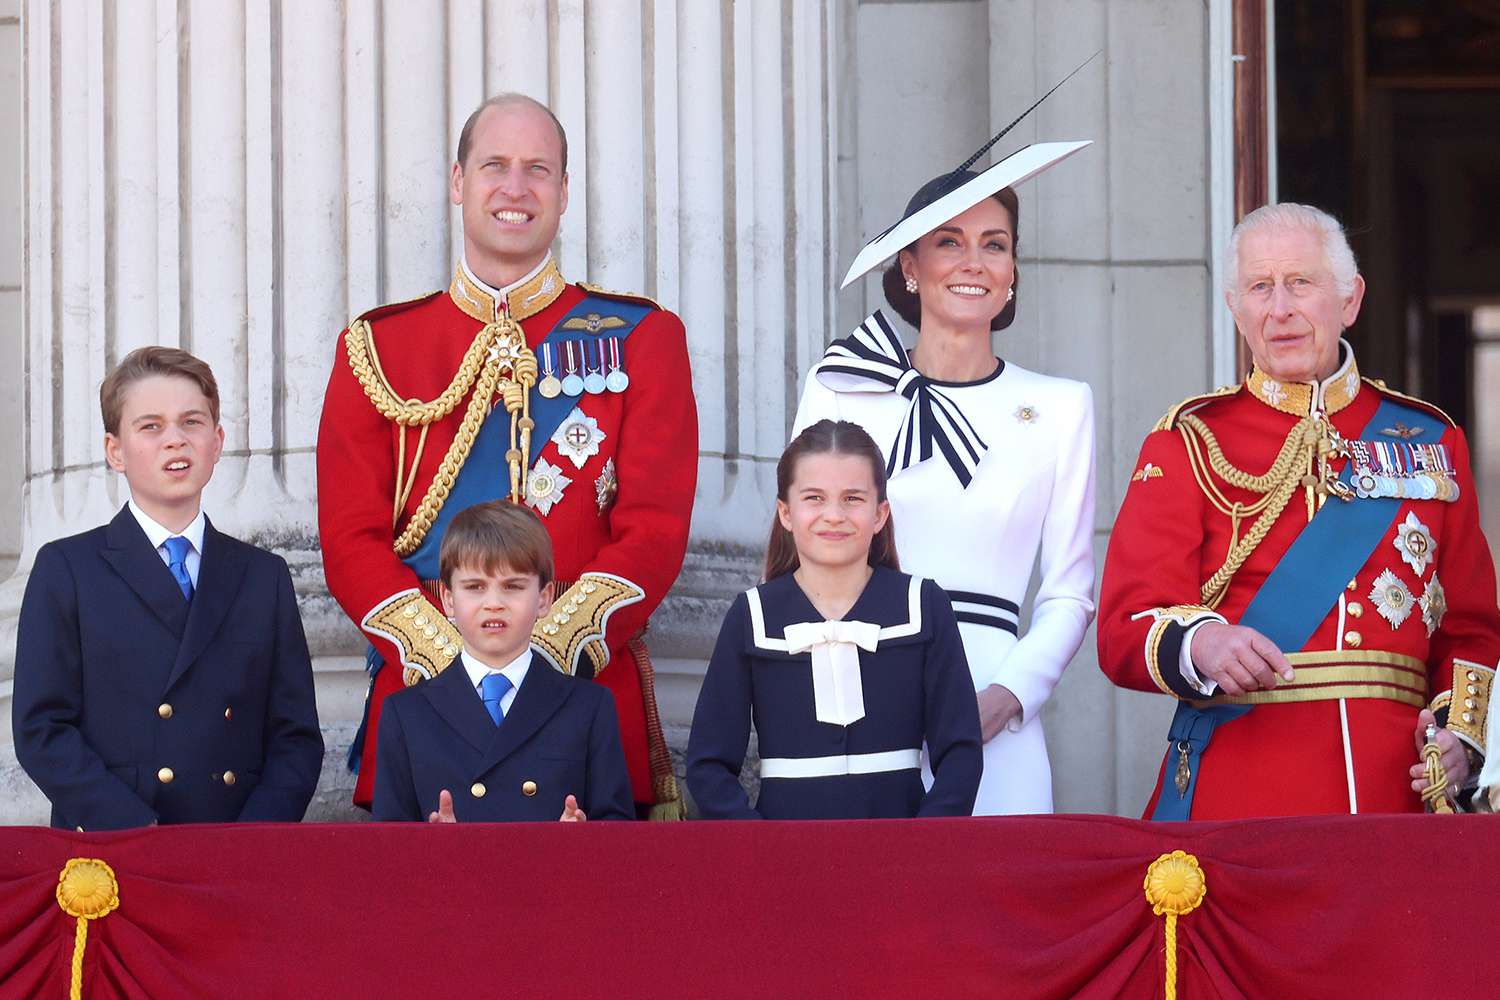 Prince William Reacts to King Charles' Inside Joke About His Grandchildren at State Banquet